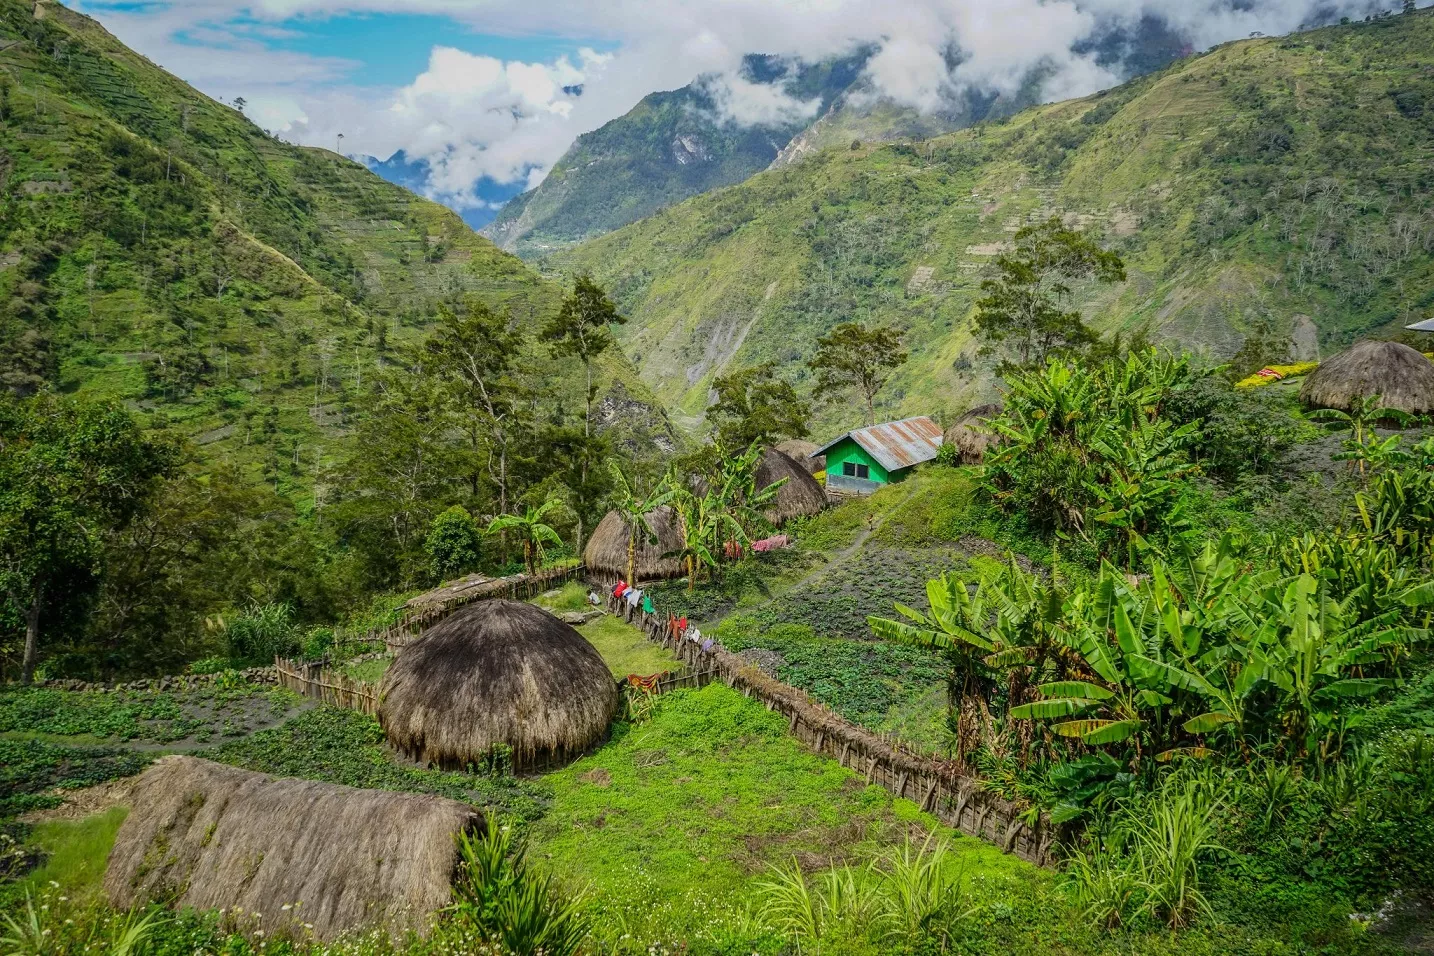 Baliem Valley in Indonesia, Central Asia | Trekking & Hiking - Rated 0.7